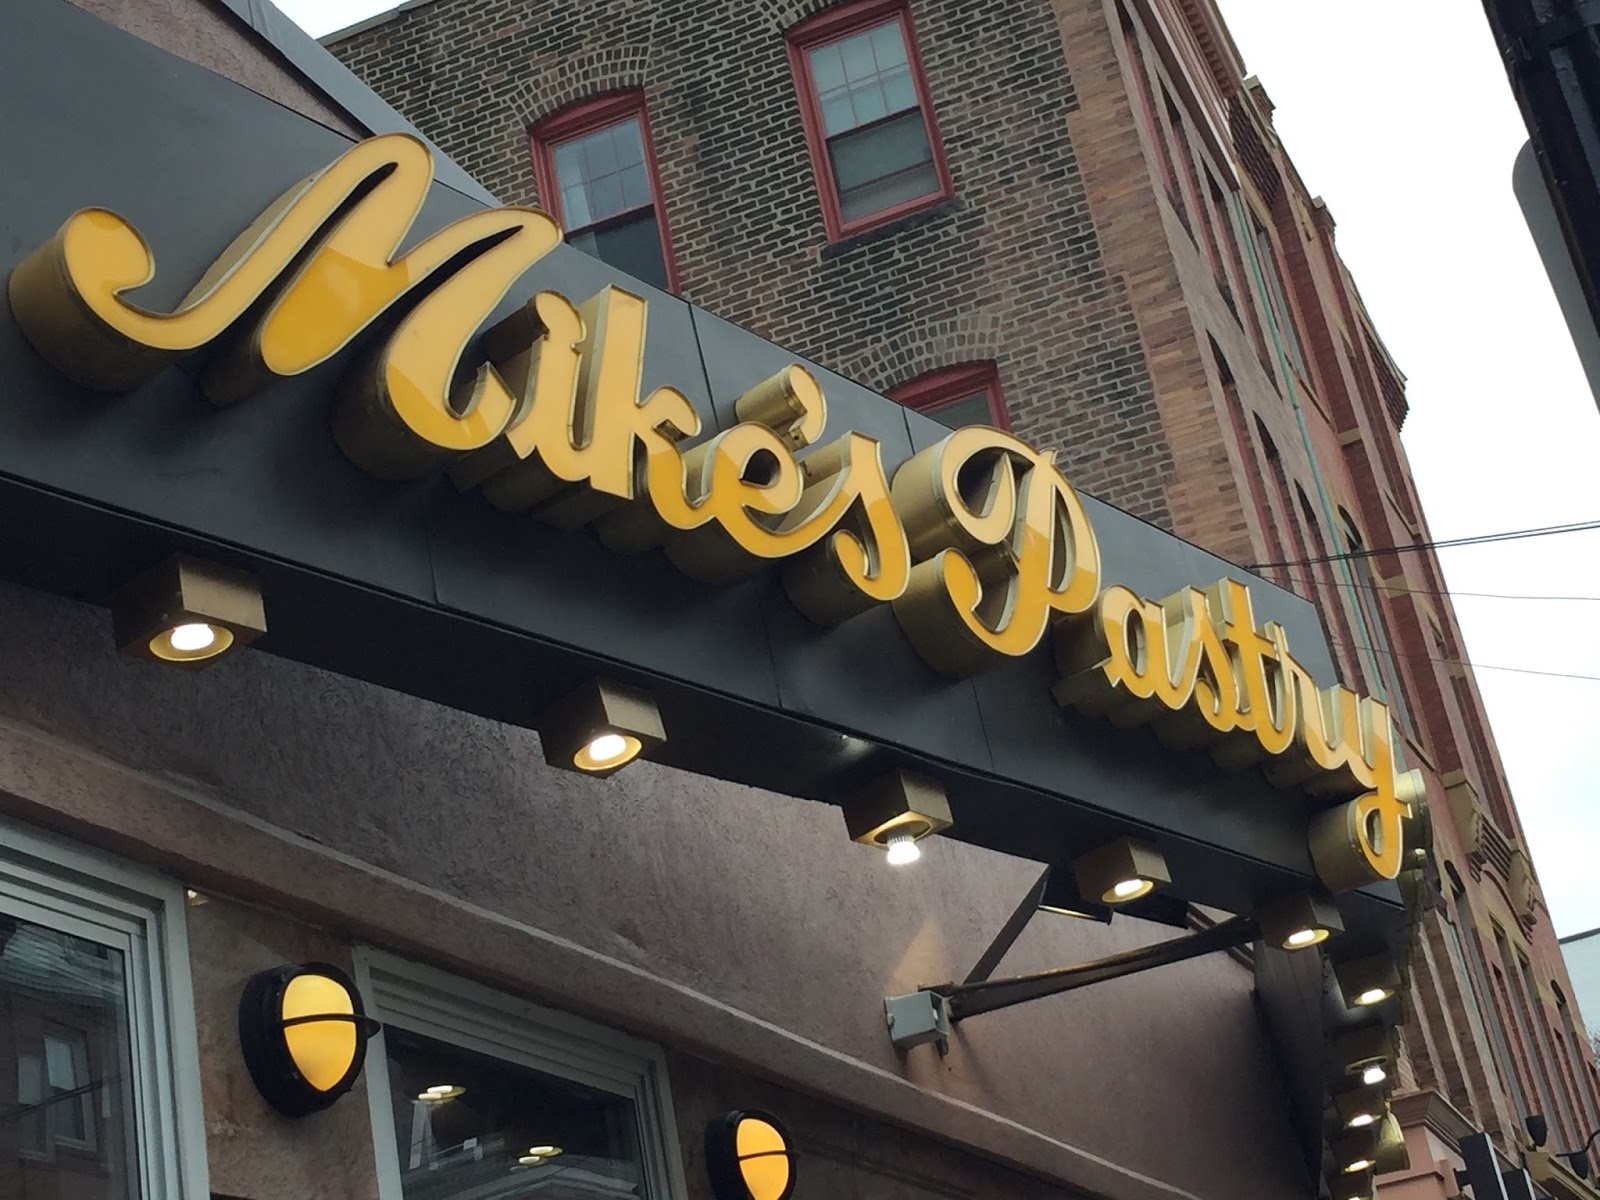 Mike's Pastry Boston